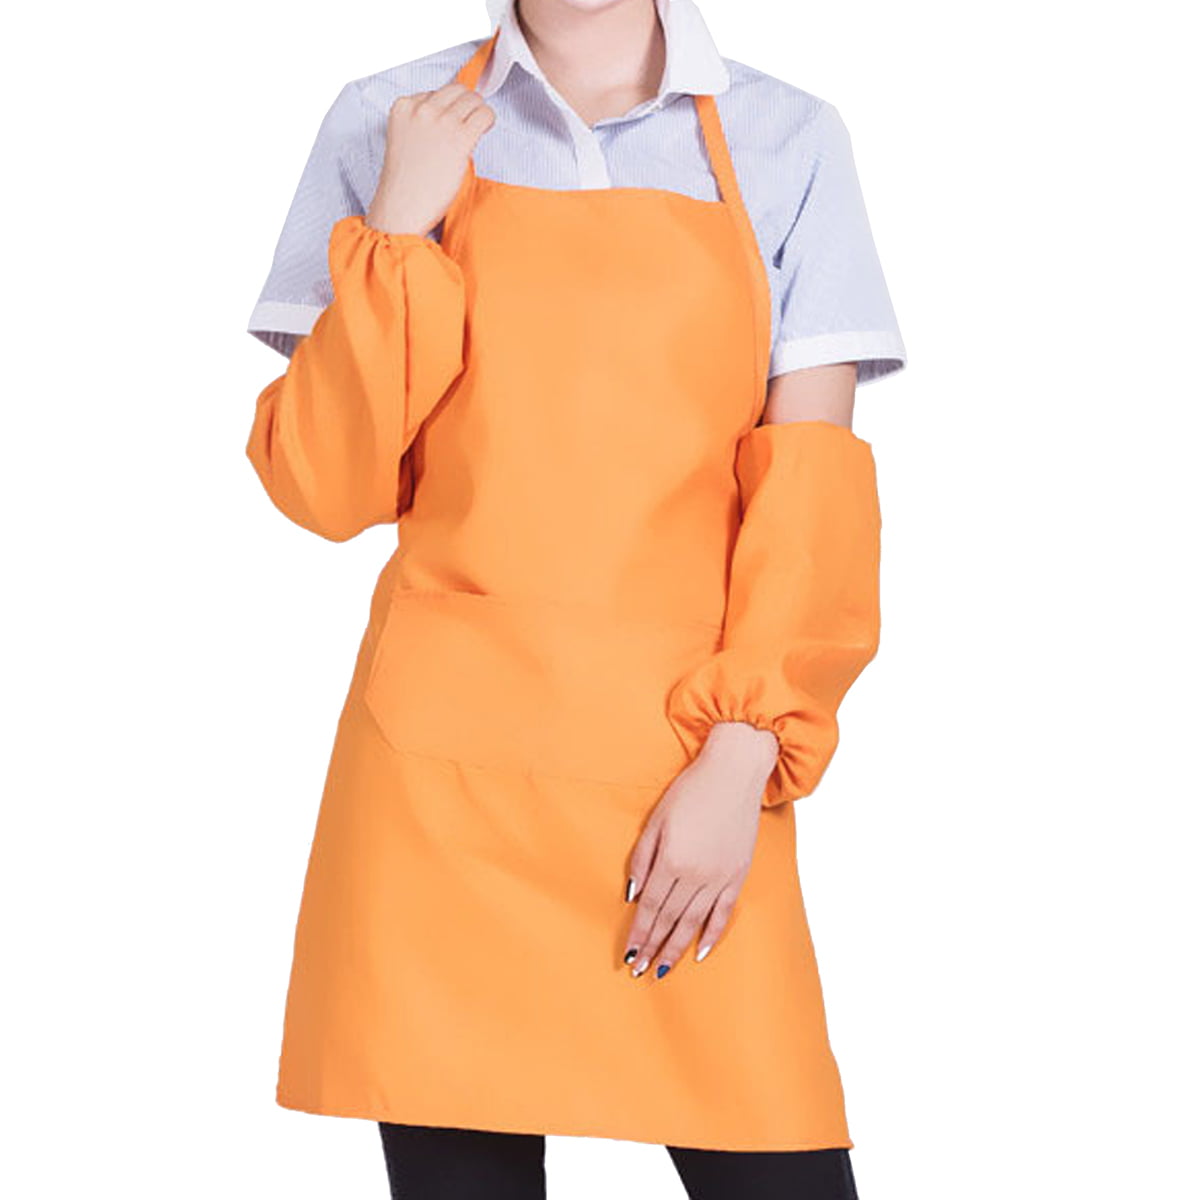 FashioN HuB Adults Apron Tabard with Front One Pocket Unisex Work Wear Kitchen Cleaning Uniform 